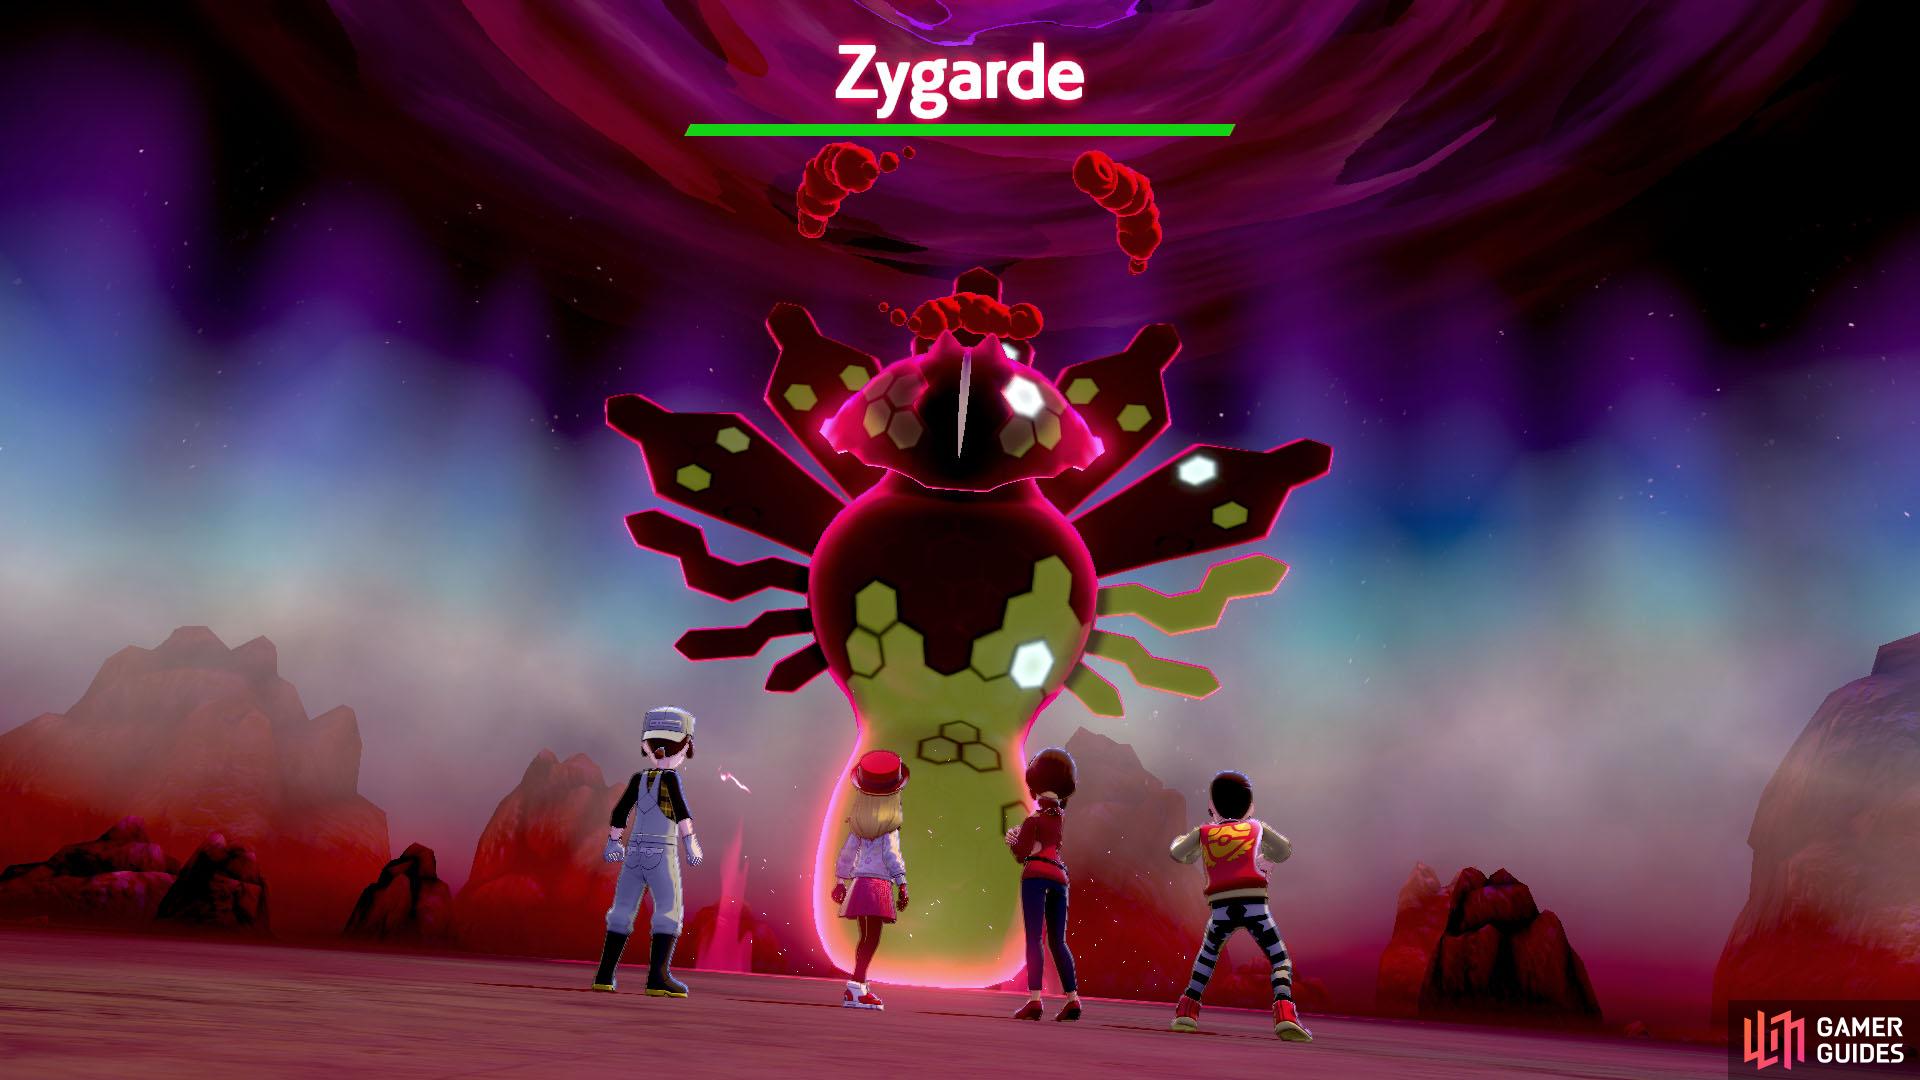 Zygarde is a beast in Dynamax Adventures, easily capable of obliterating teams.